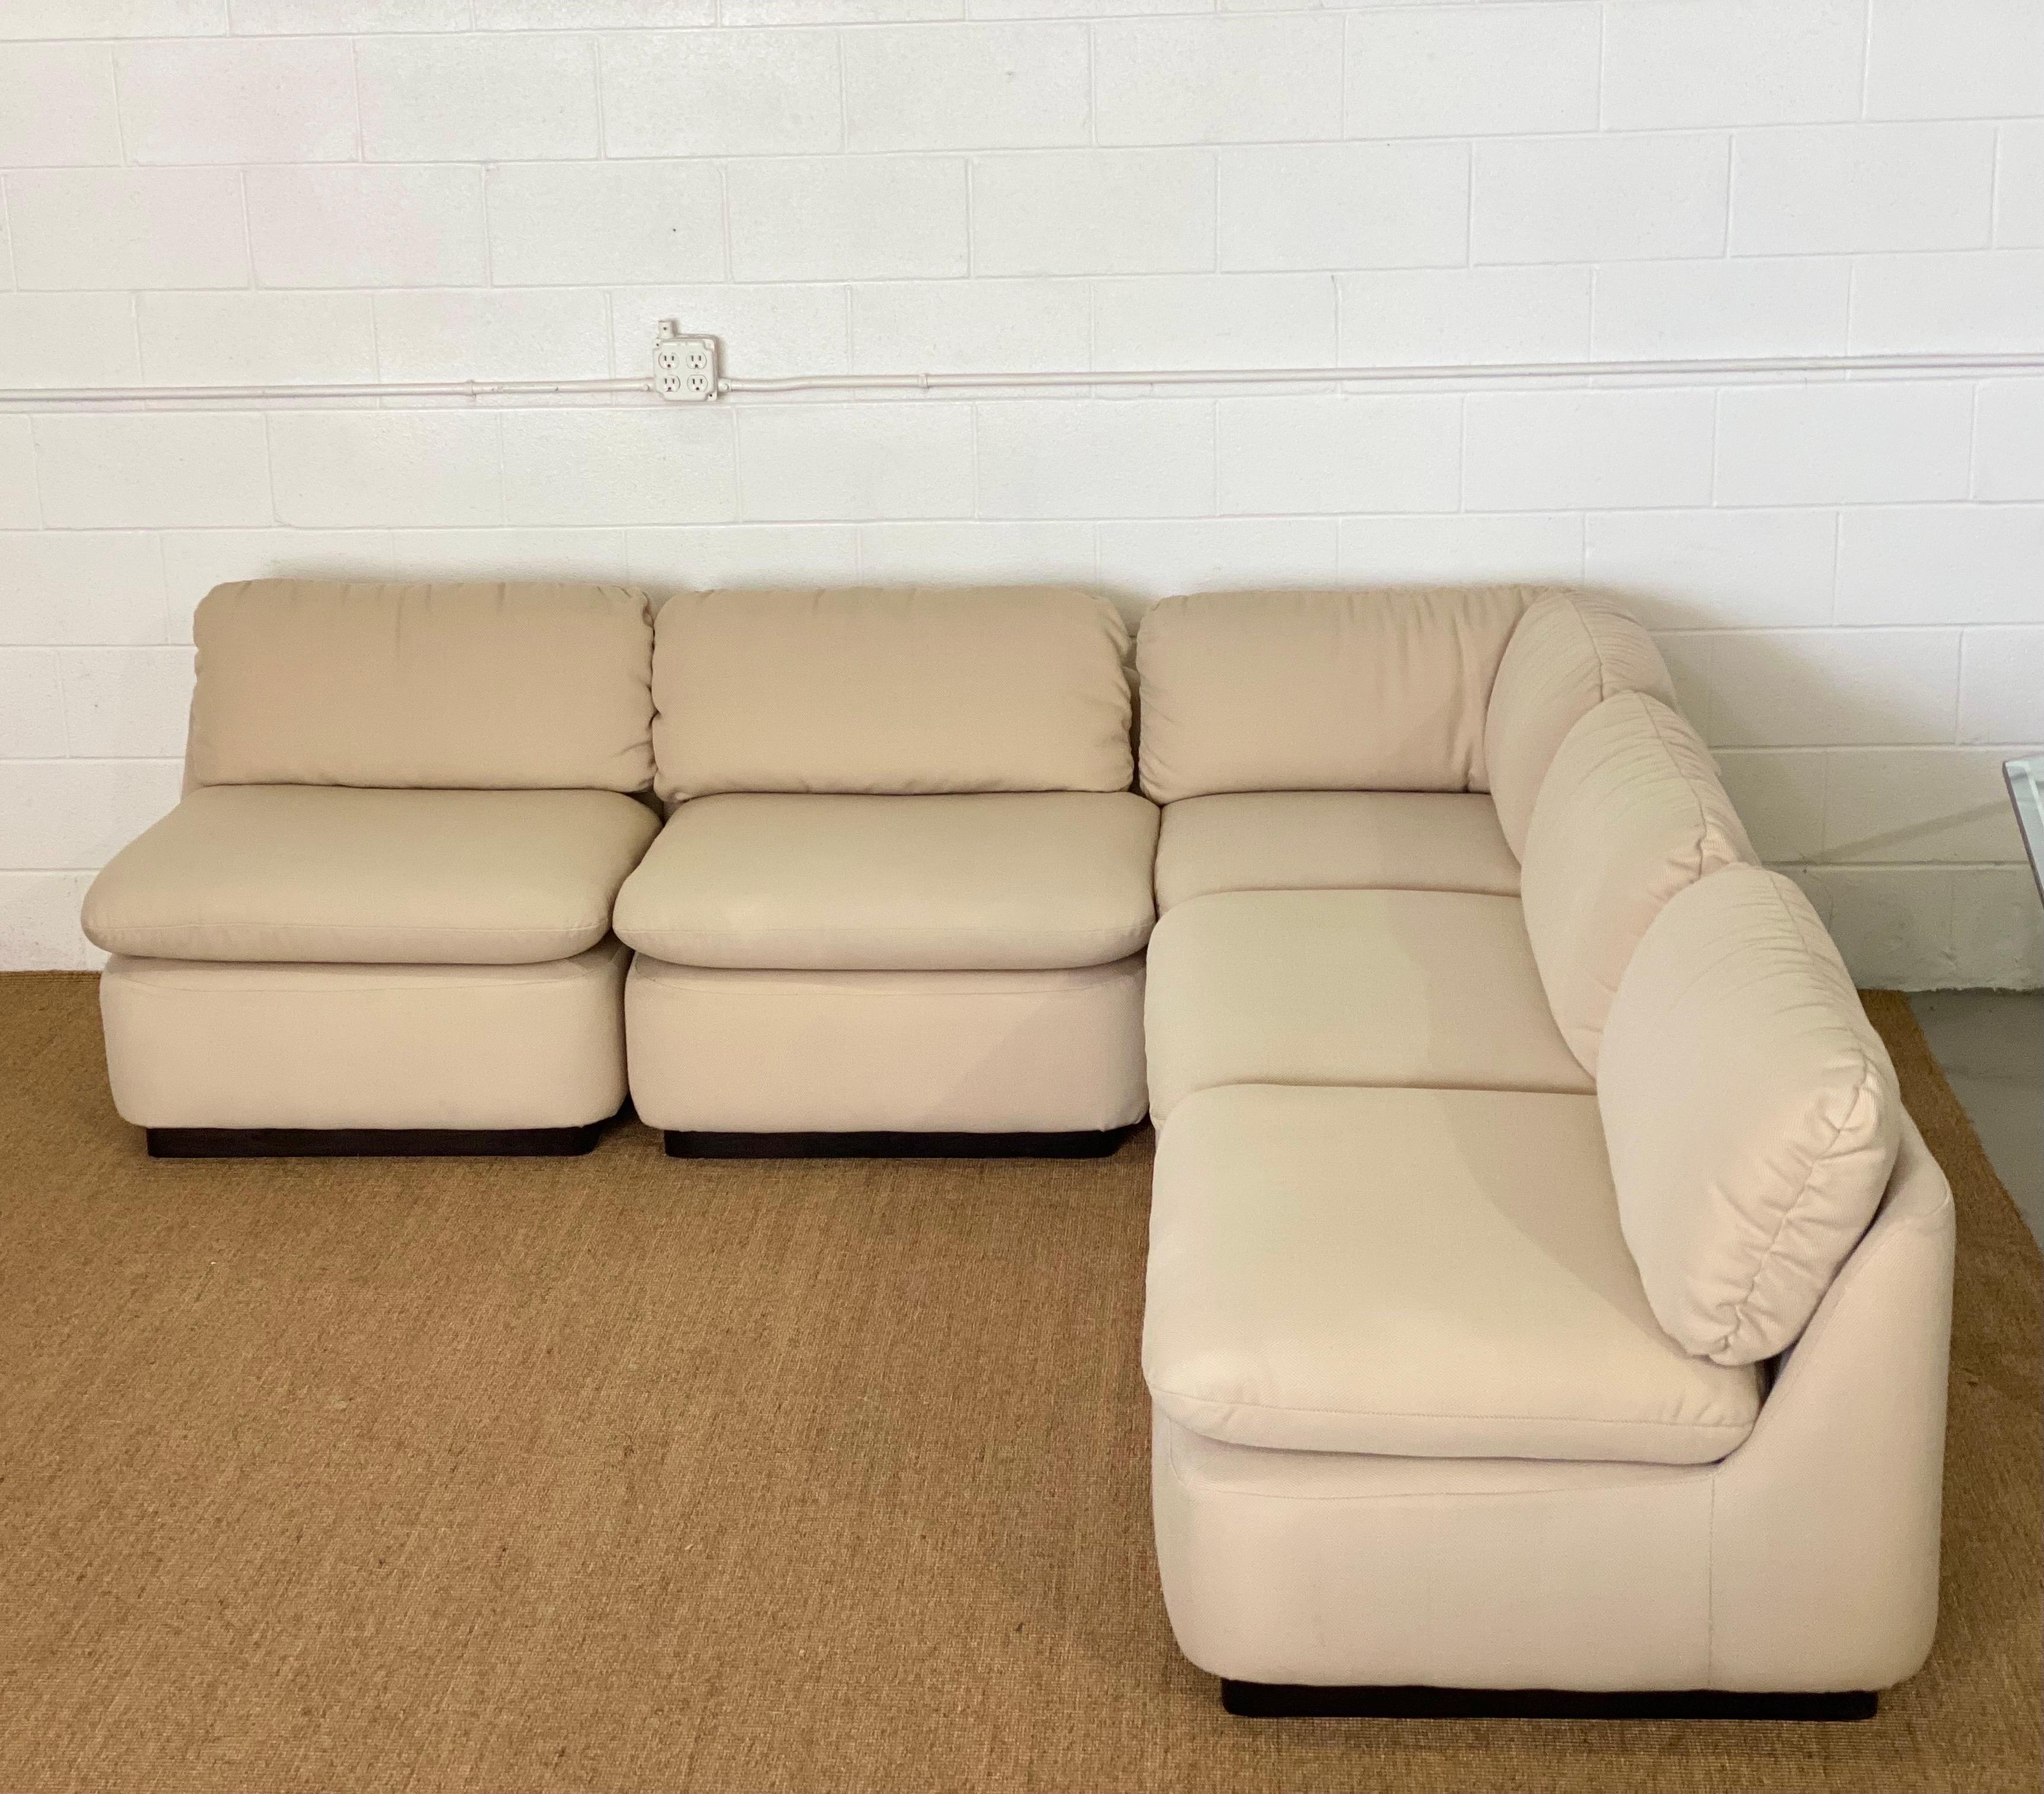 We are very pleased to offer a chic and timeless five-piece sectional by Directional circa the 1990s. Showcasing linear elements, this piece offers a visual dialogue between structure and shape. Designed with a clean aesthetic in mind and a casual